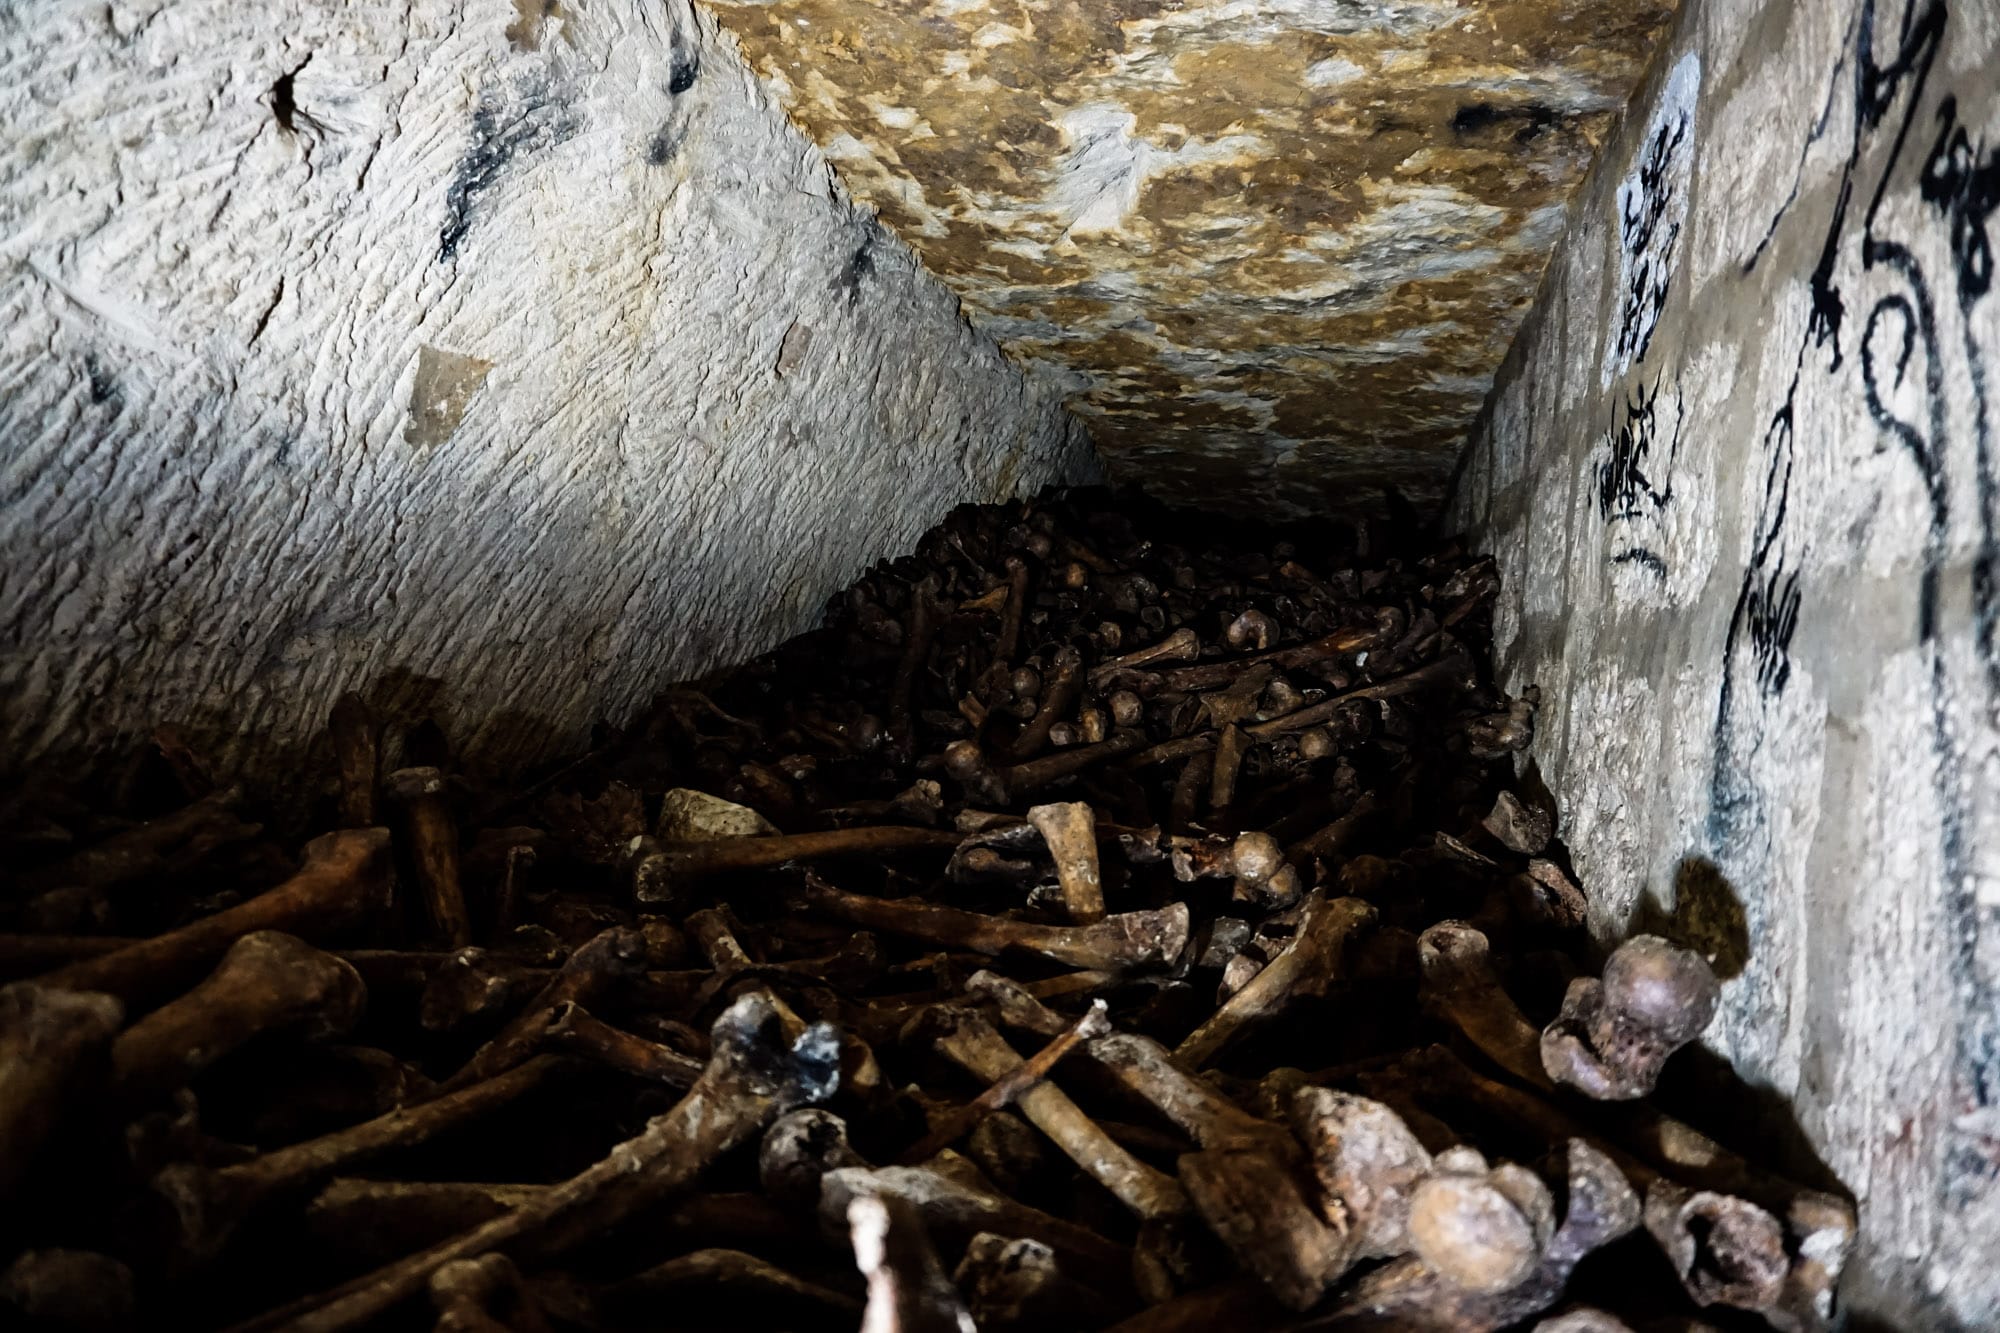 Illegal Tunnel In The Paris Catacombs Filled With Bones and Skulls